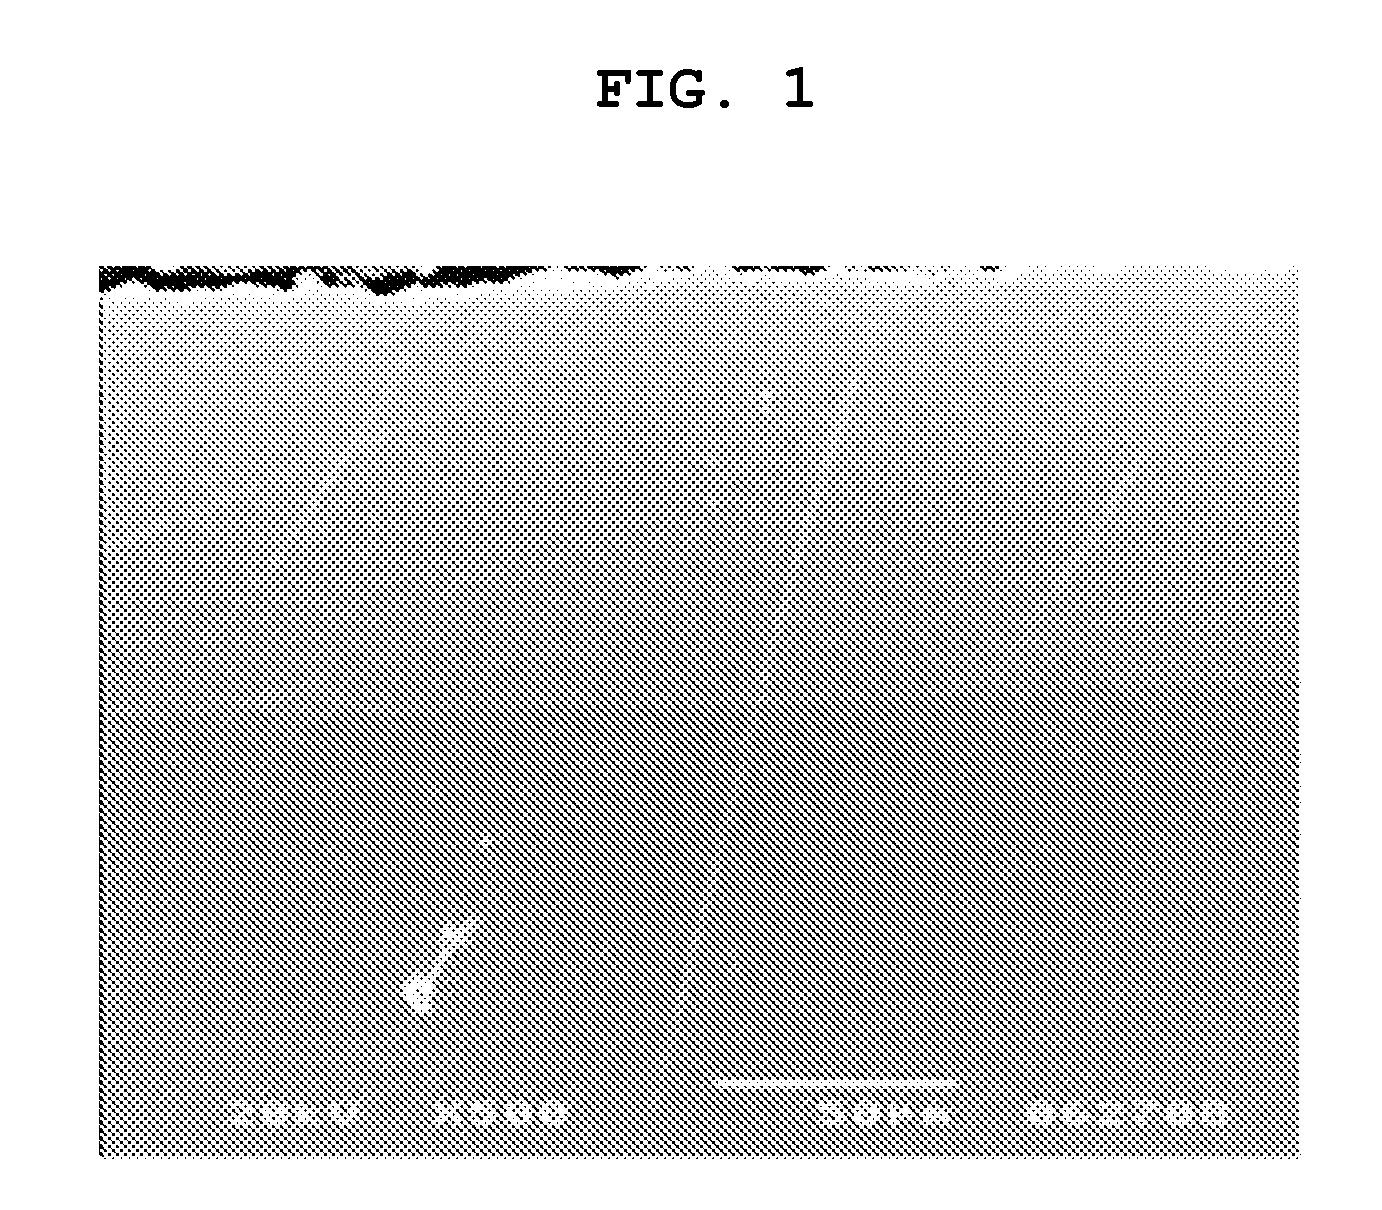 Method of preventing corrosion degradation using ni or ni-alloy plating